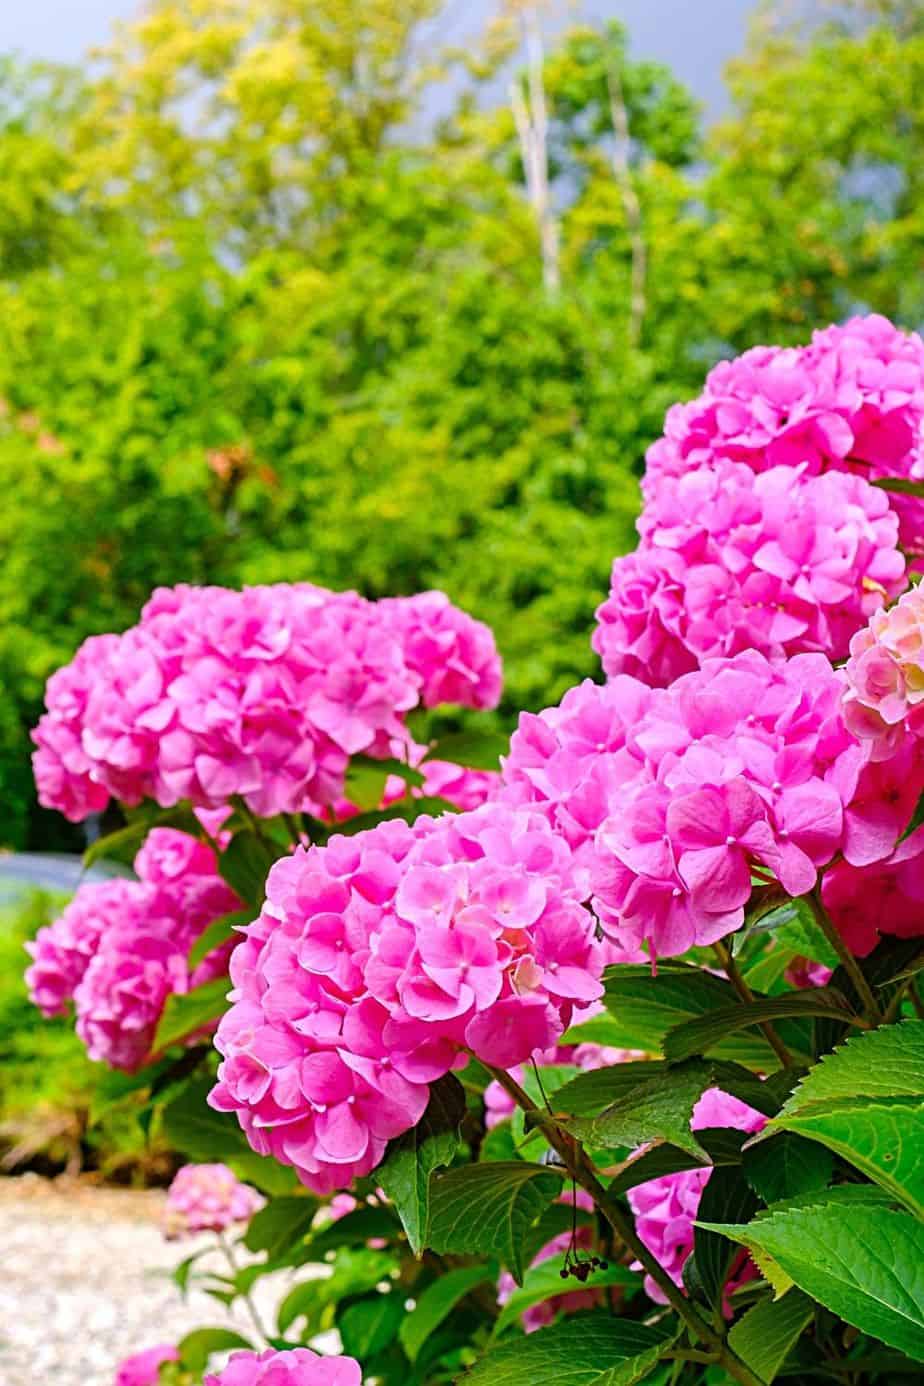 Hydrangea, as it grows 8 feet tall and 8 feet wide, is another plant you can grow for privacy